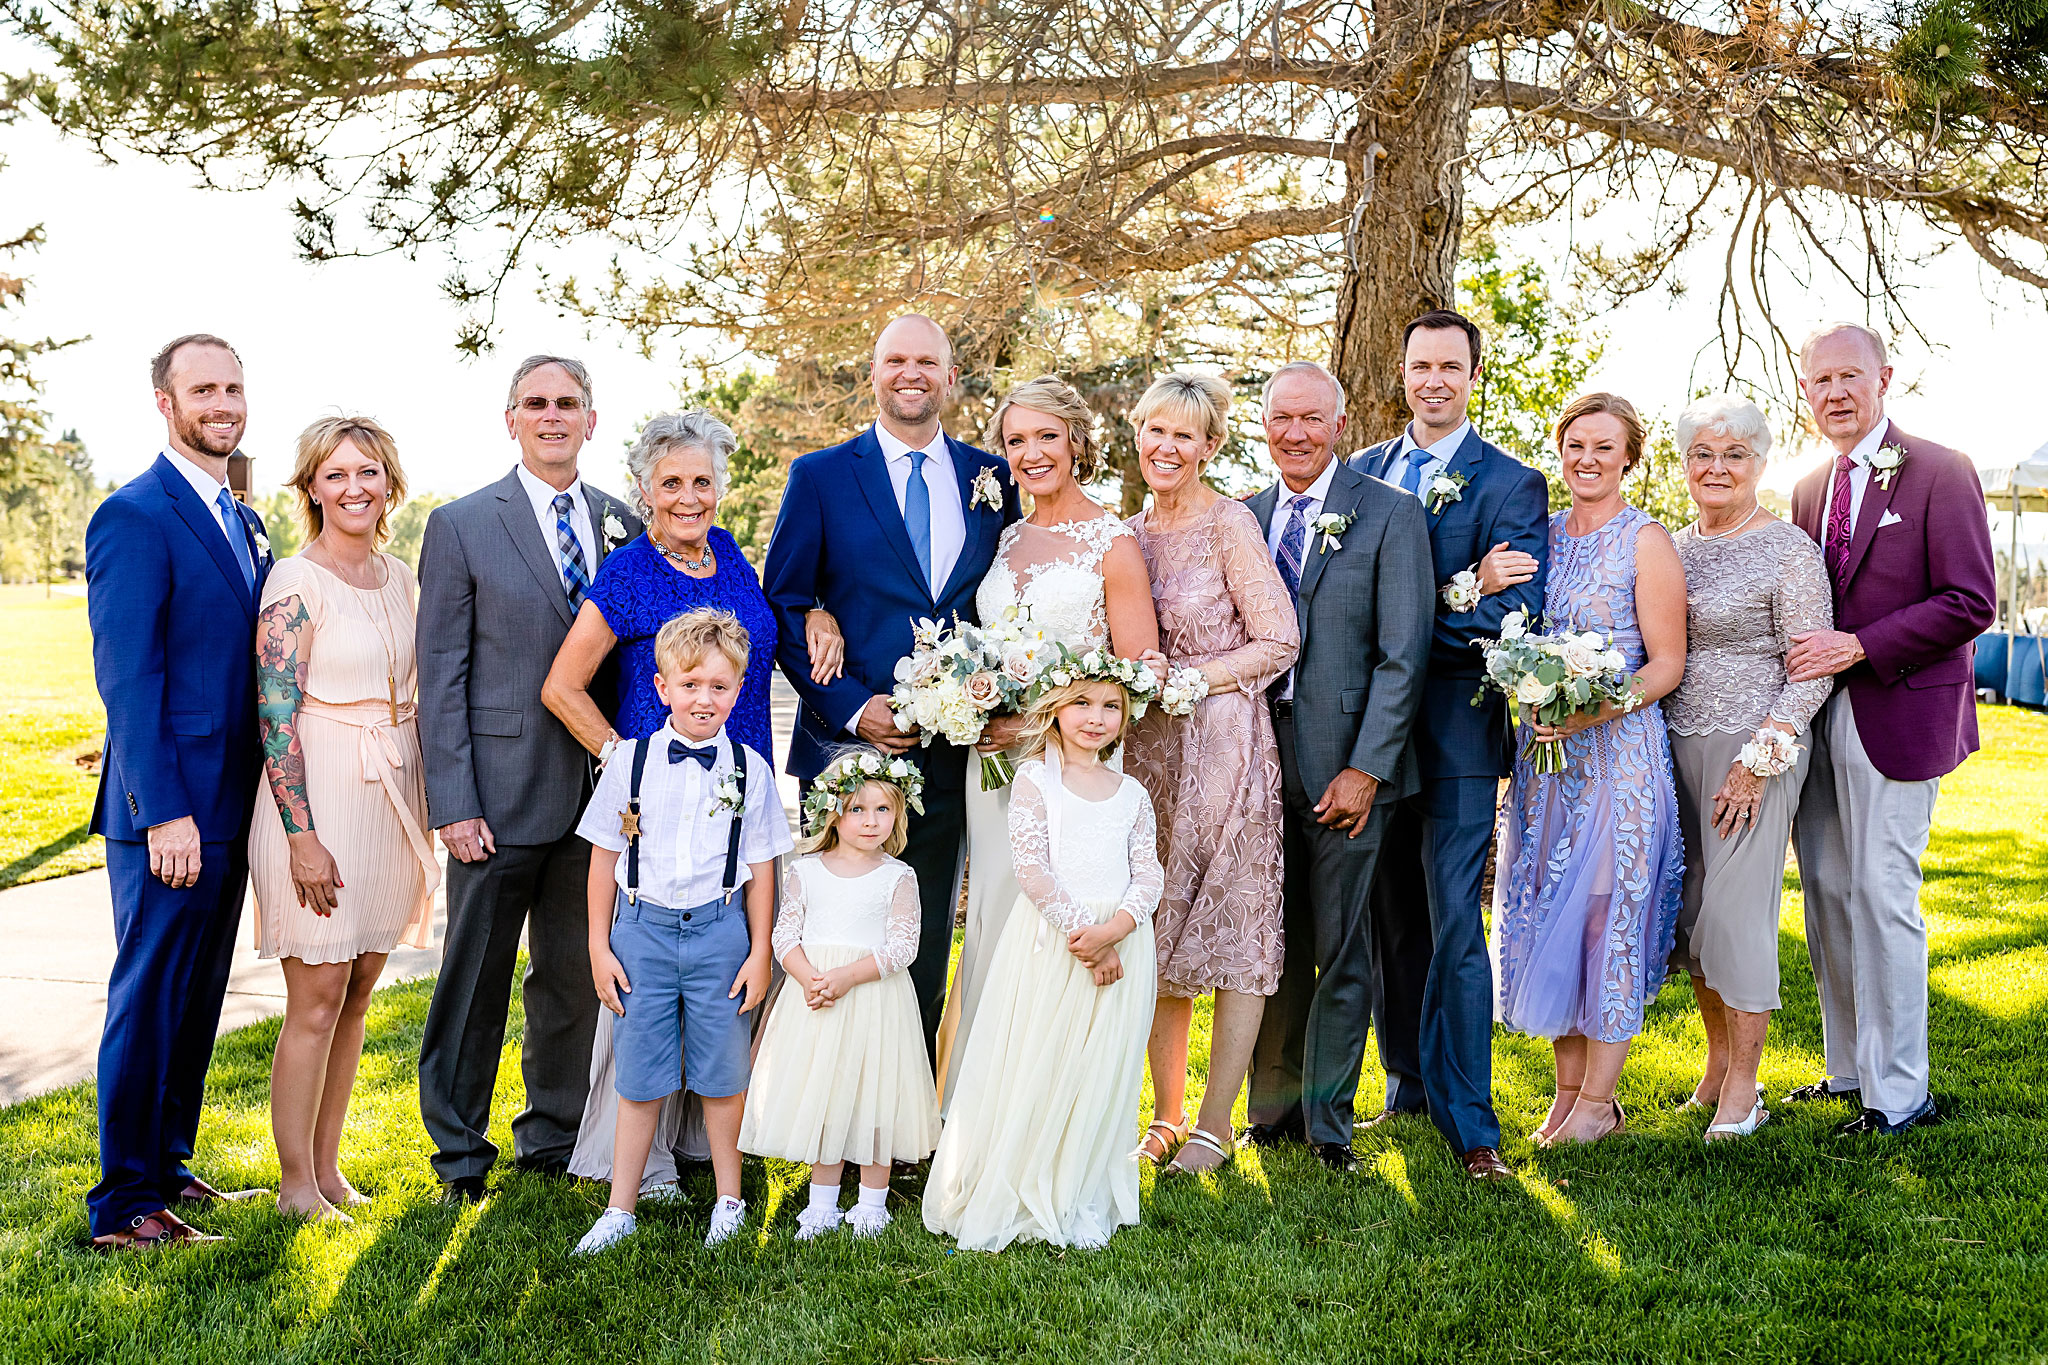 Large Family photo with Bride and Groom. Kelli & Jason's golf course wedding at The Ranch Country Club by Colorado Wedding Photographer Jennifer Garza, Small wedding ideas, Intimate wedding, Golf Course Wedding, Country Club Wedding, Summer Wedding, Golf Wedding, Wedding planning, Colorado Wedding Photographer, Colorado Elopement Photographer, Colorado Elopement, Colorado Wedding, Denver Wedding Photographer, Denver Wedding, Wedding Inspiration, Summer Wedding Inspiration, Covid Wedding